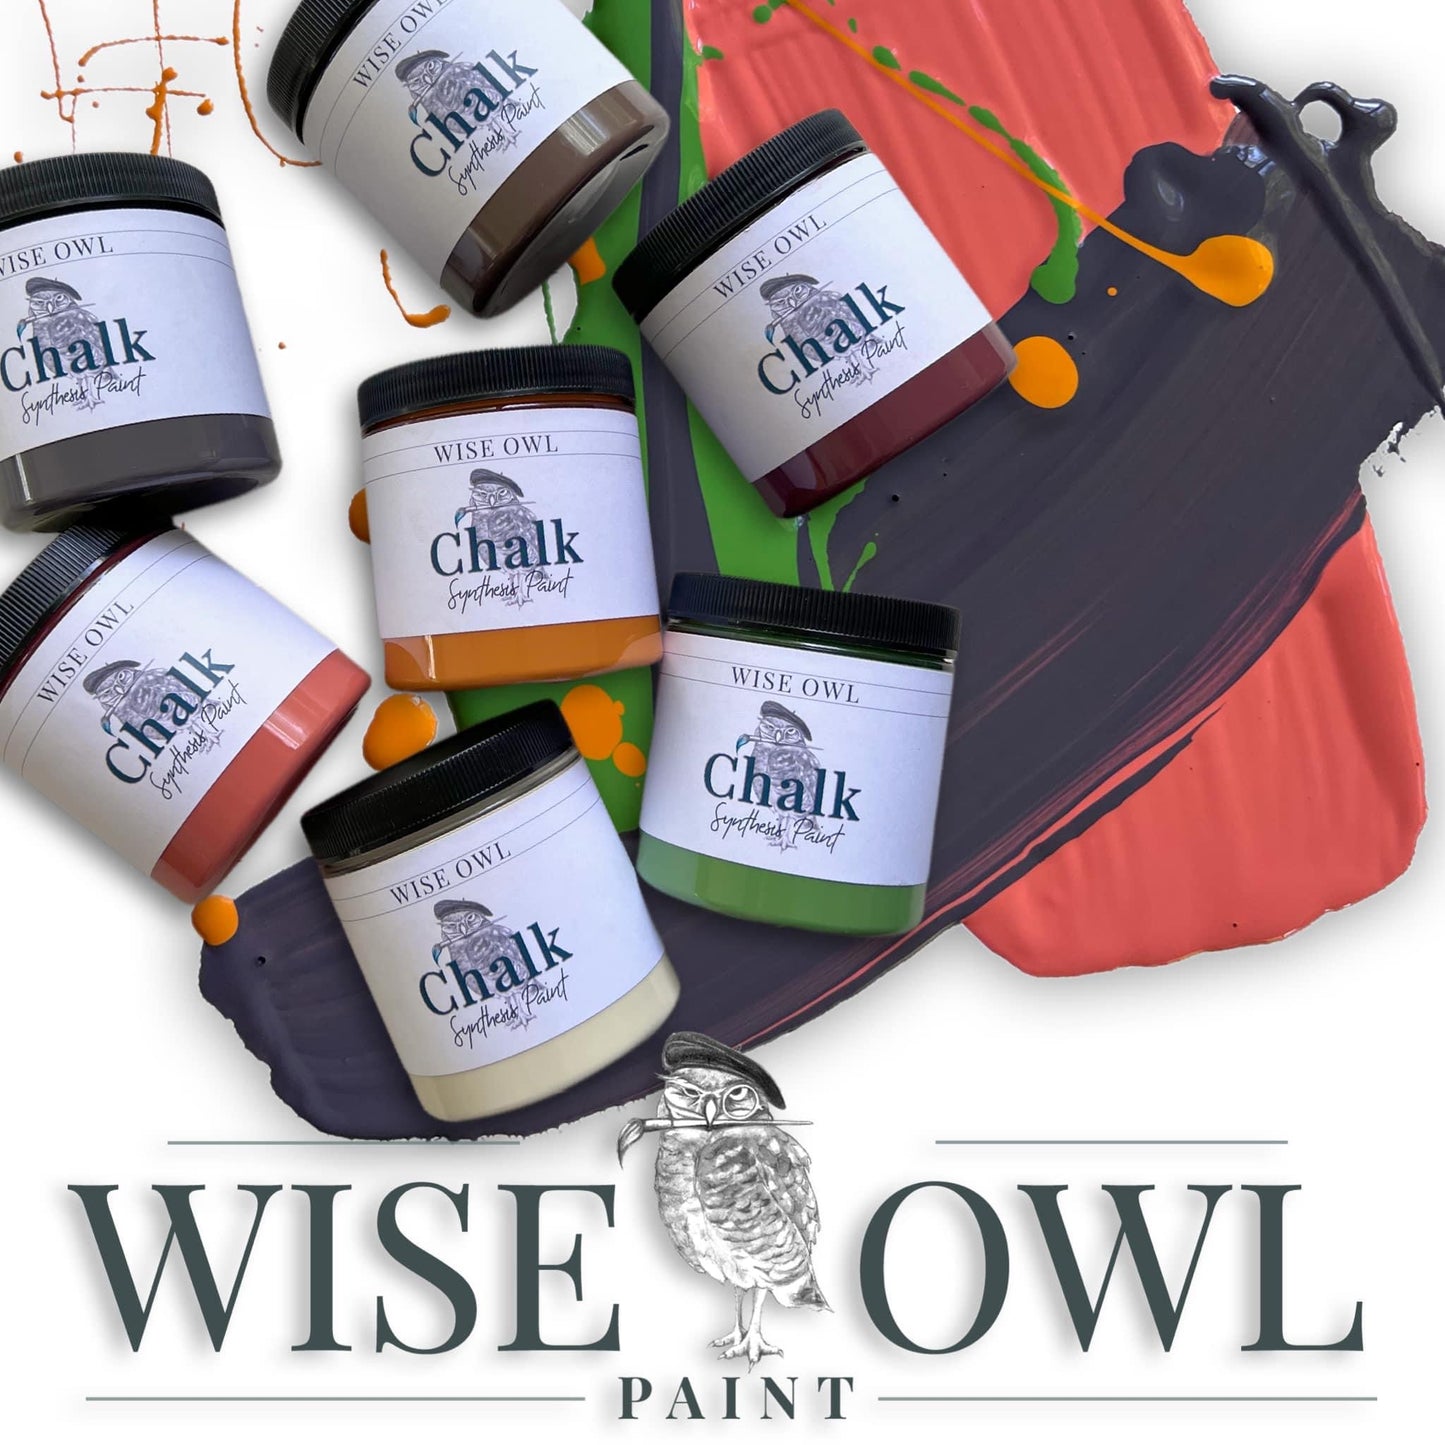 Wise Owl Chalk Synthesis Paint - Thunderstruck